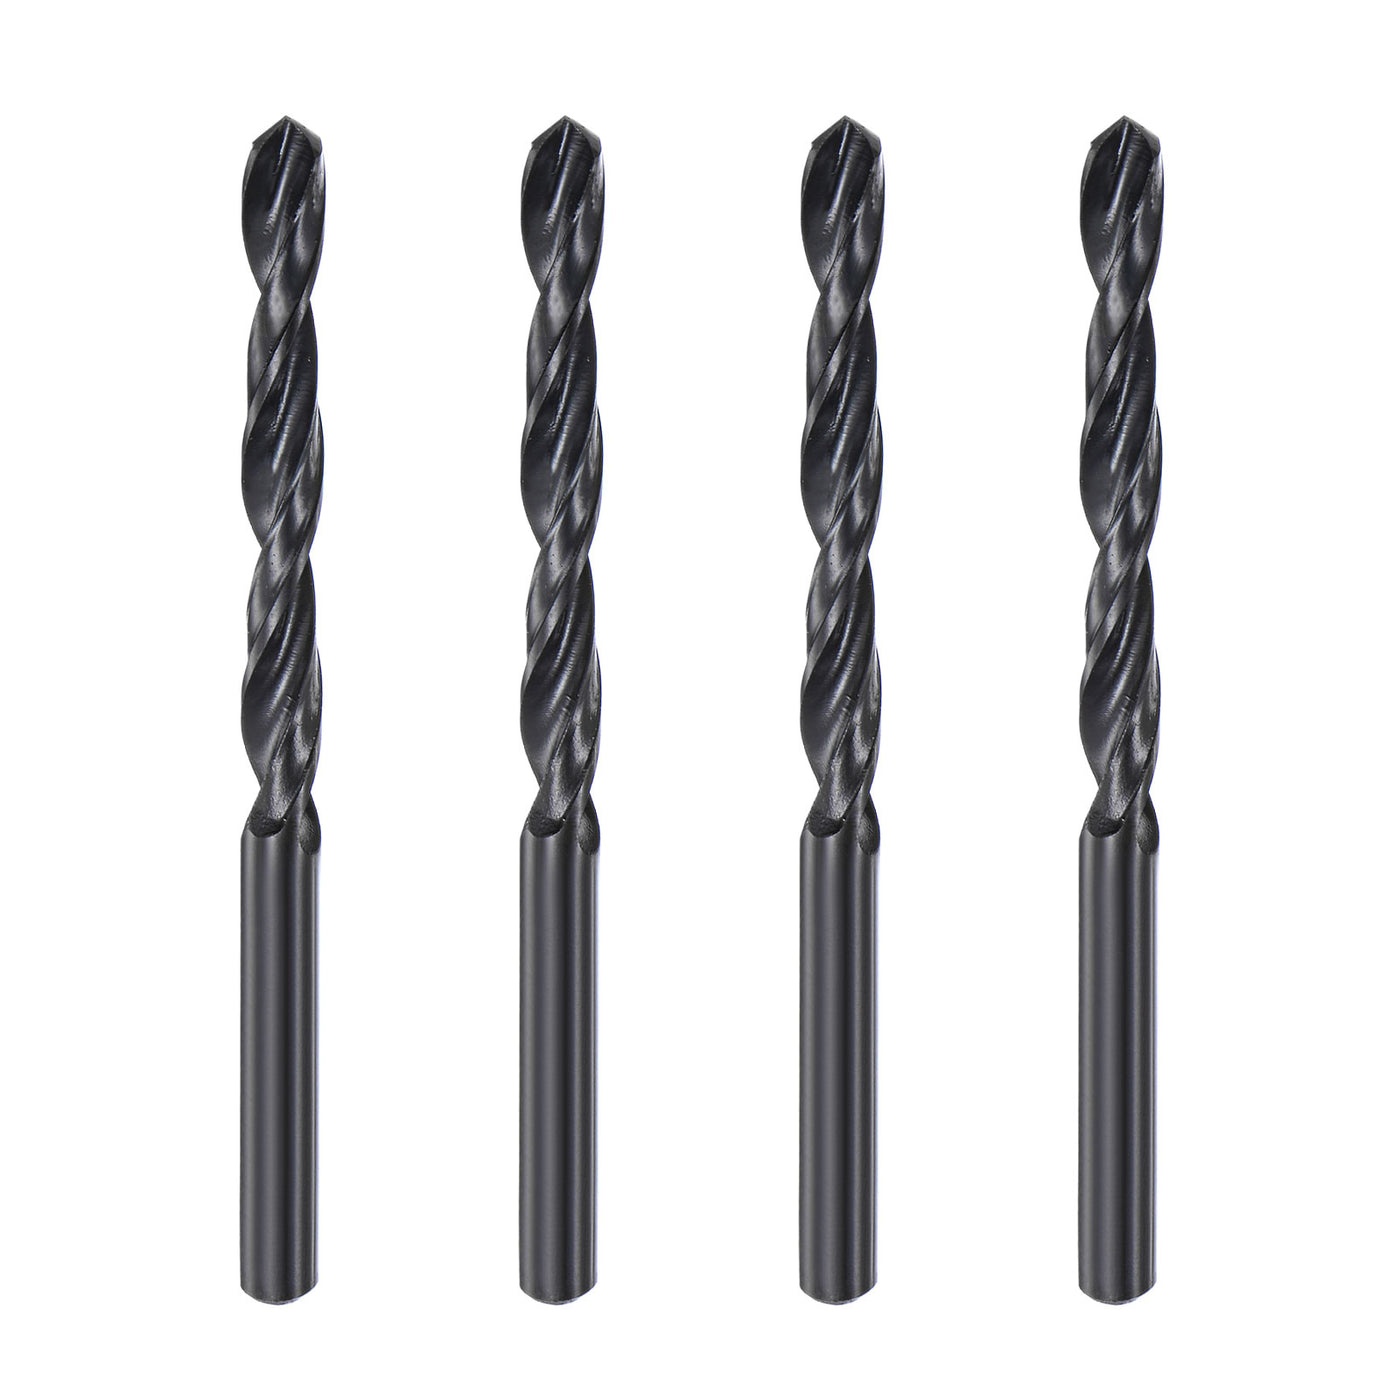 uxcell Uxcell High Speed Steel Twist Drill Bit, 7.2mm Fully Ground Black Oxide 108mm Long 4Pcs